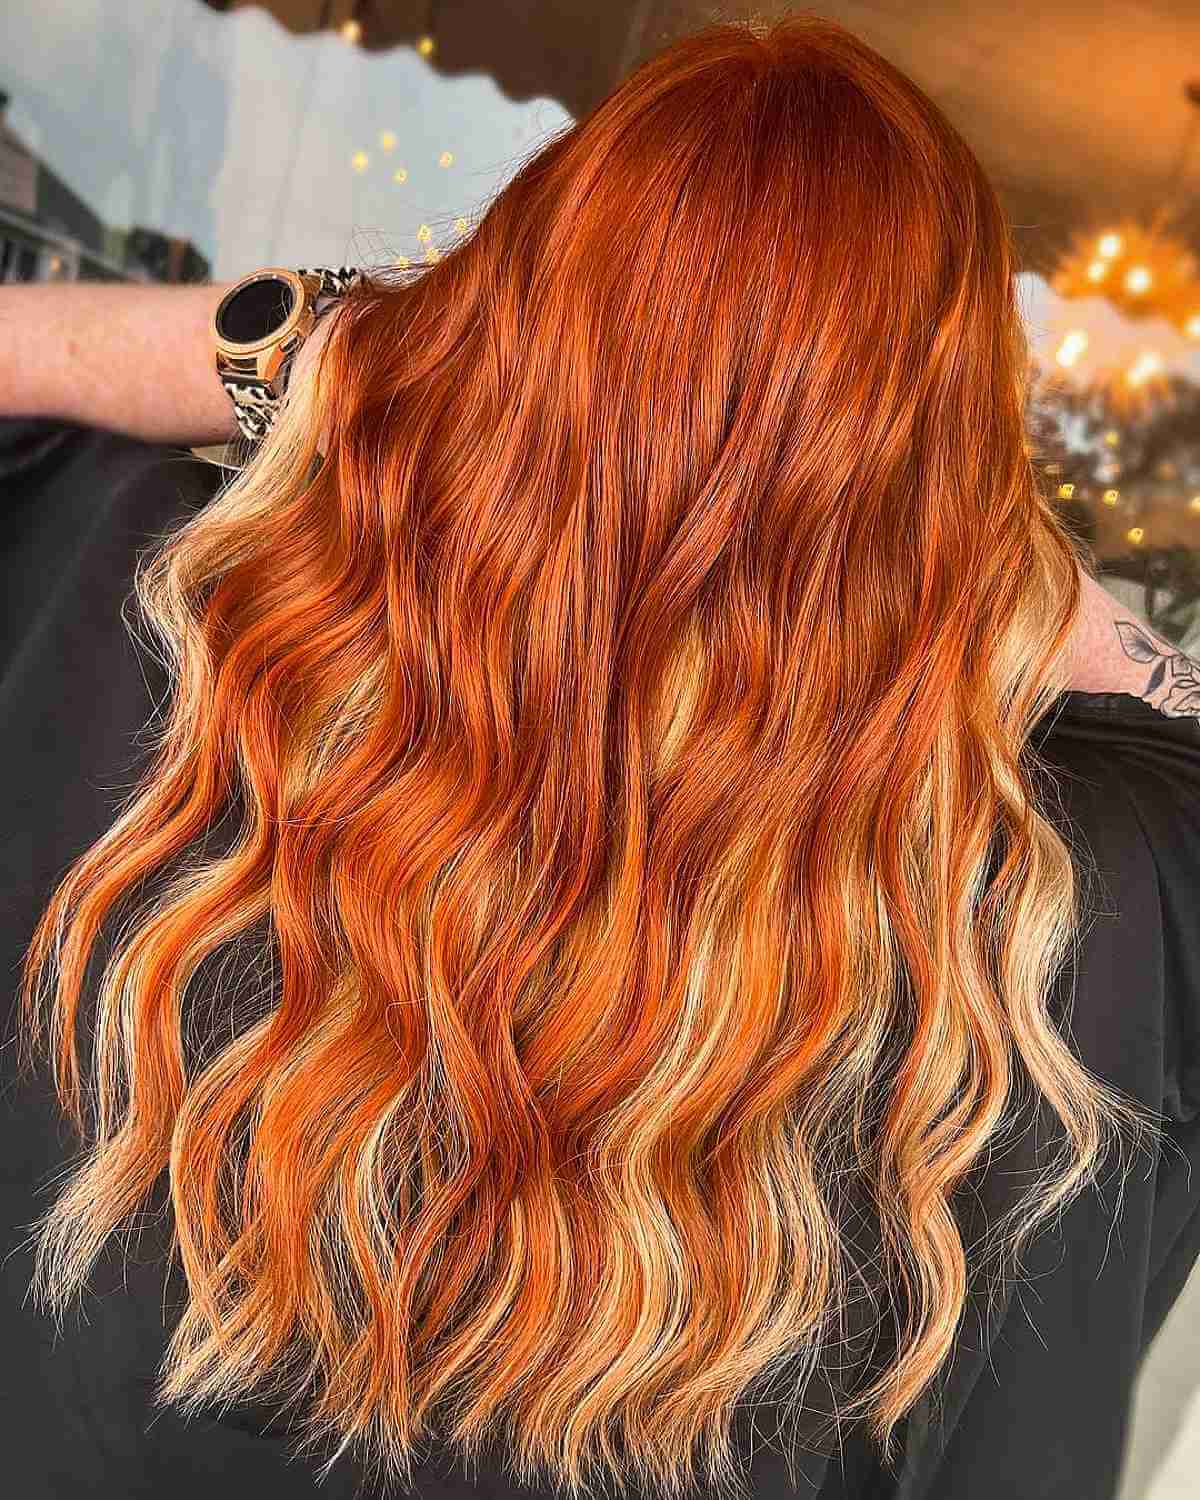 Fiery Blonde and Red Long Hair